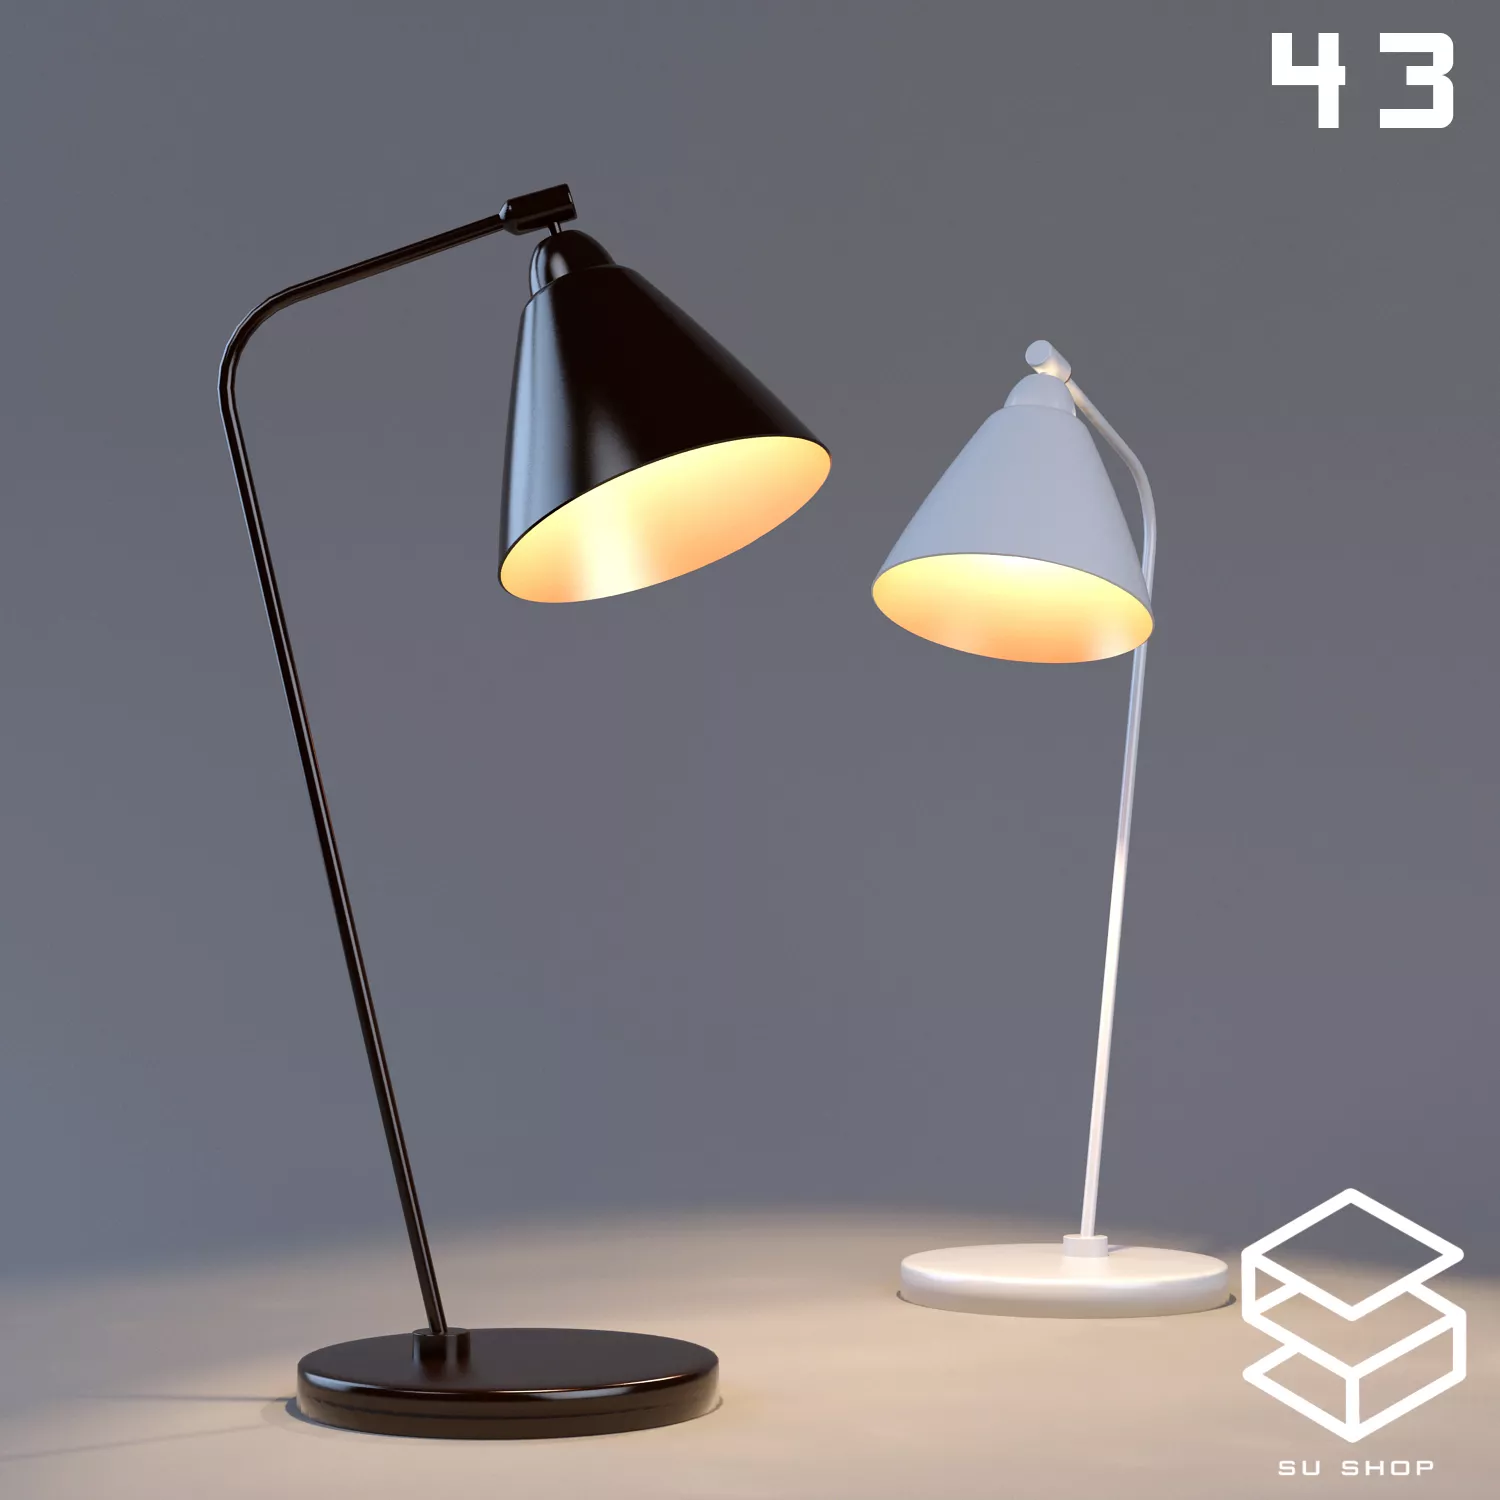 MODERN TABLE LAMP - SKETCHUP 3D MODEL - VRAY OR ENSCAPE - ID14837